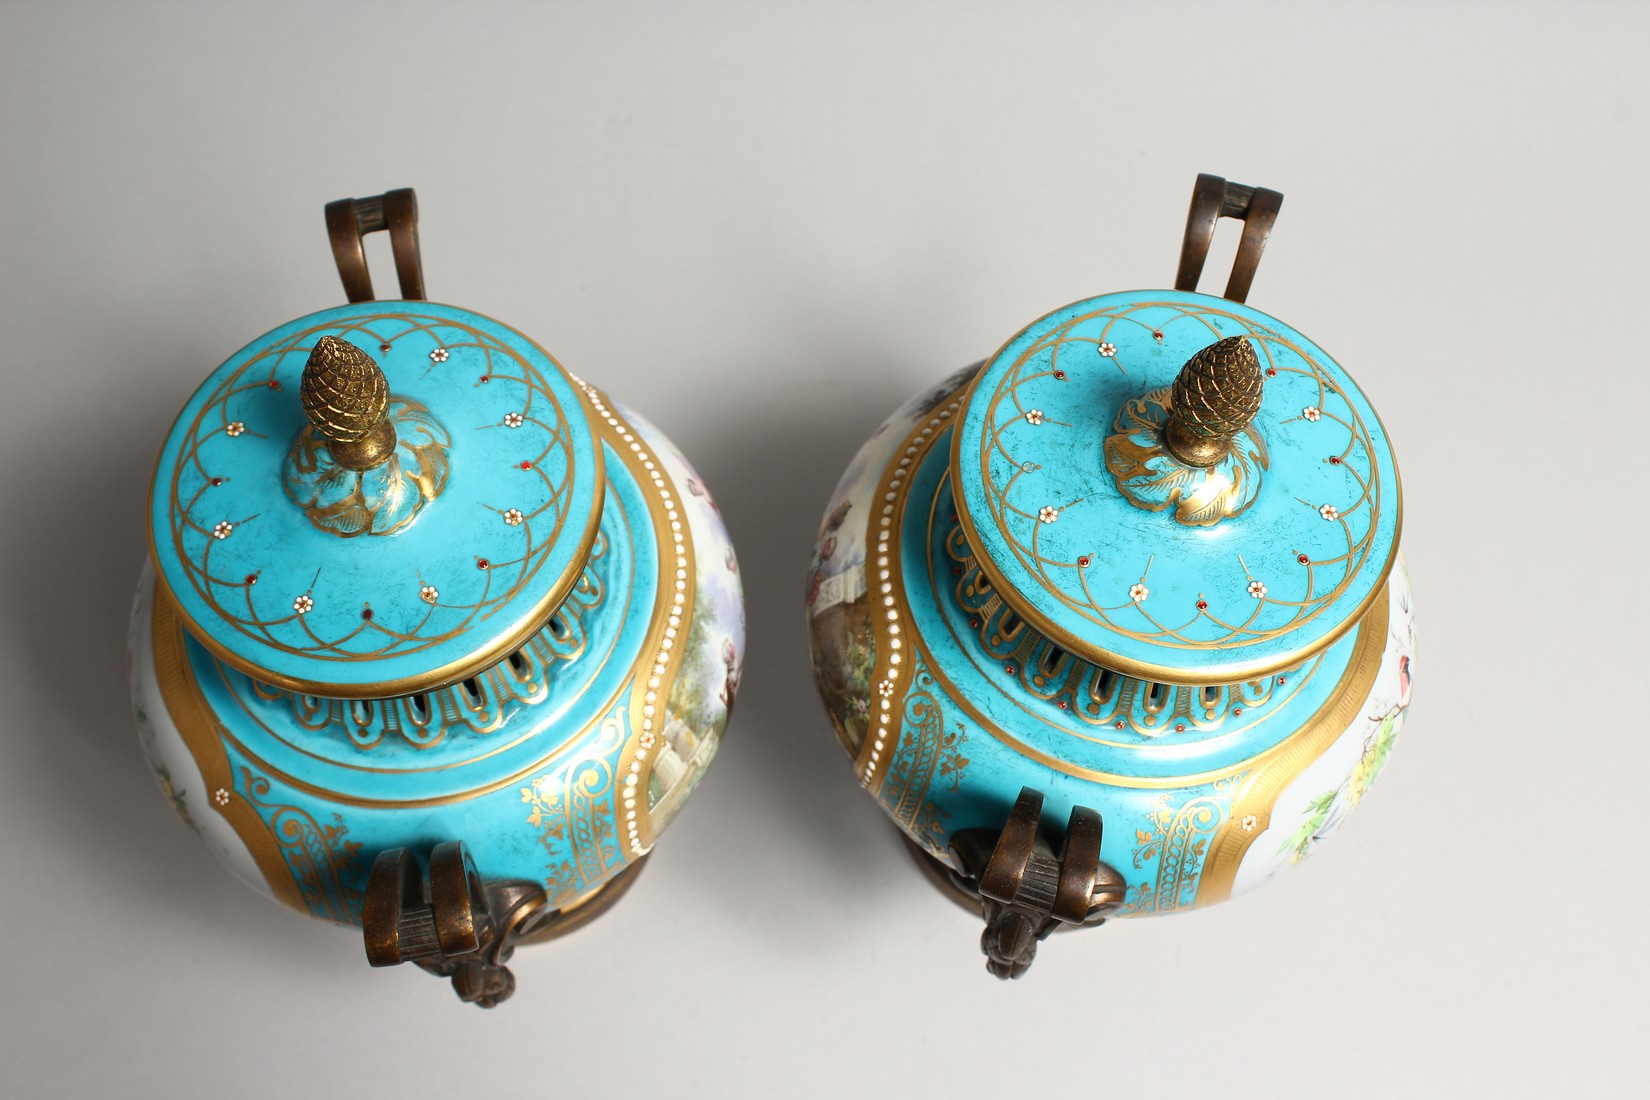 A SUPERB PAIR OF SEVRES PORCELAIN ORMOLU MOUNTED CIRCULAR VASES AND COVERS, painted with reverse - Image 5 of 6